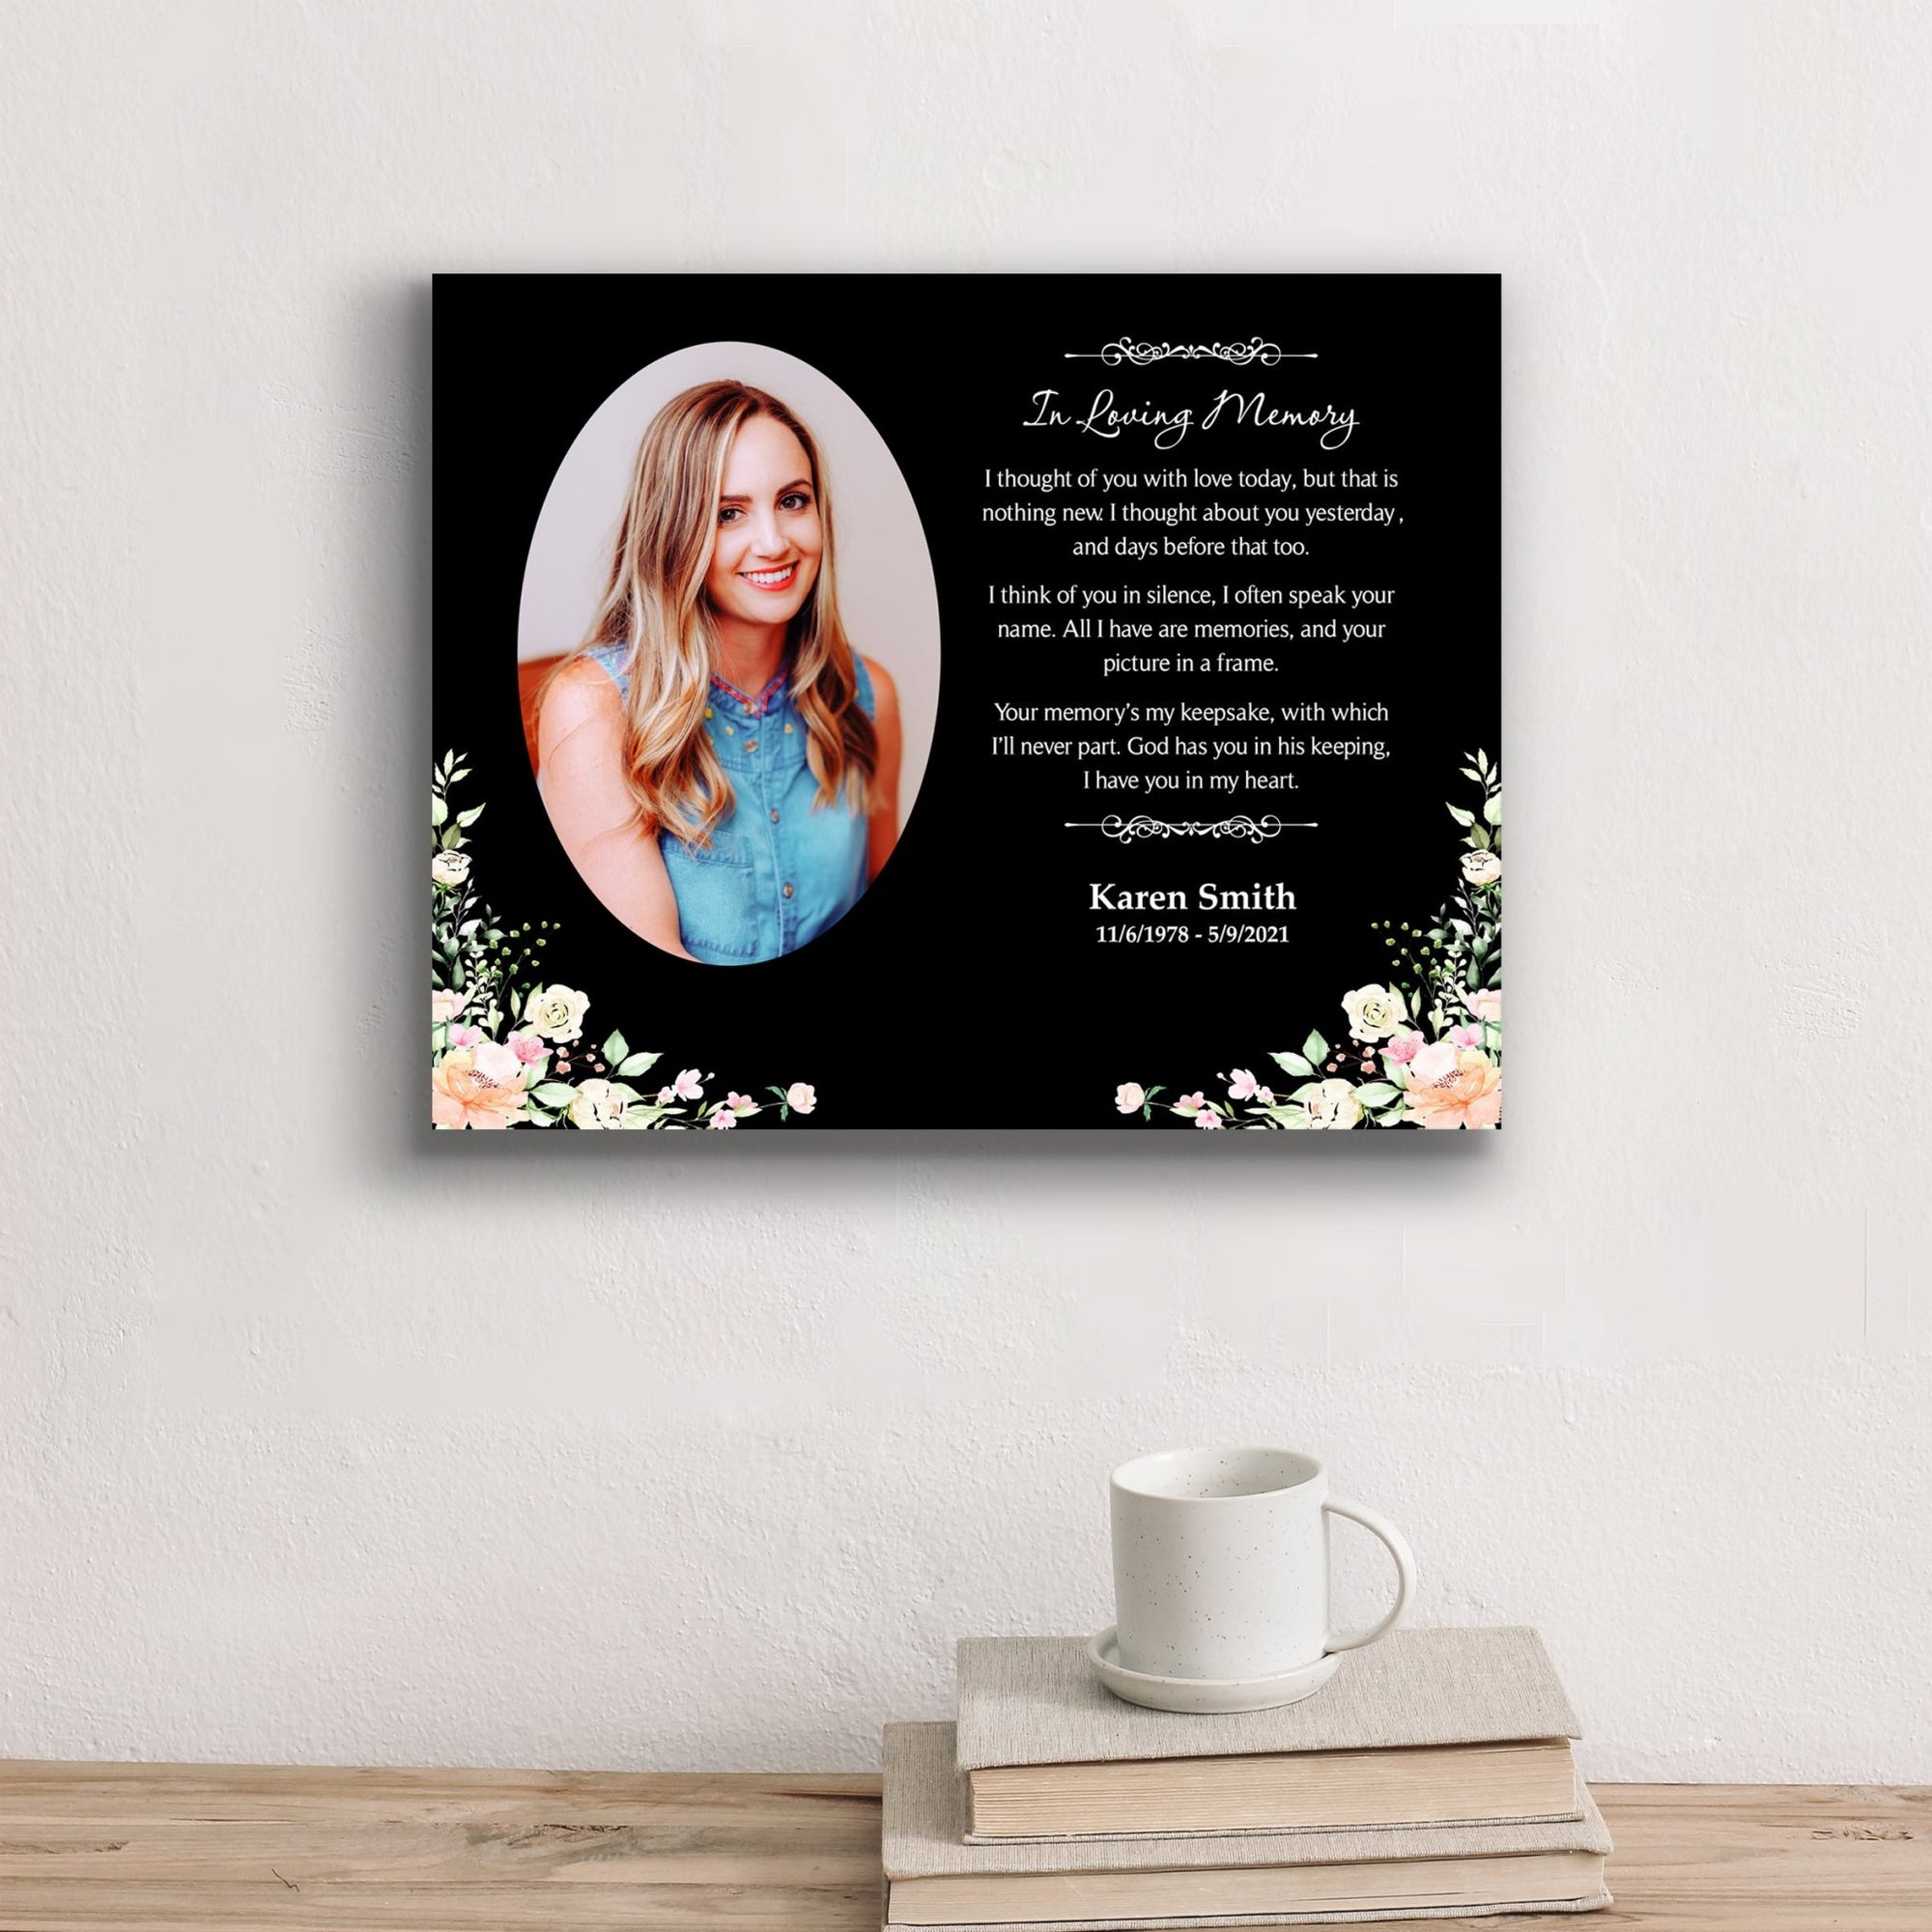 Personalized Human Memorial Black Photo & Inspirational Verse Bereavement Wall Décor & Sympathy Gift Ideas - In loving Memory - LifeSong Milestones